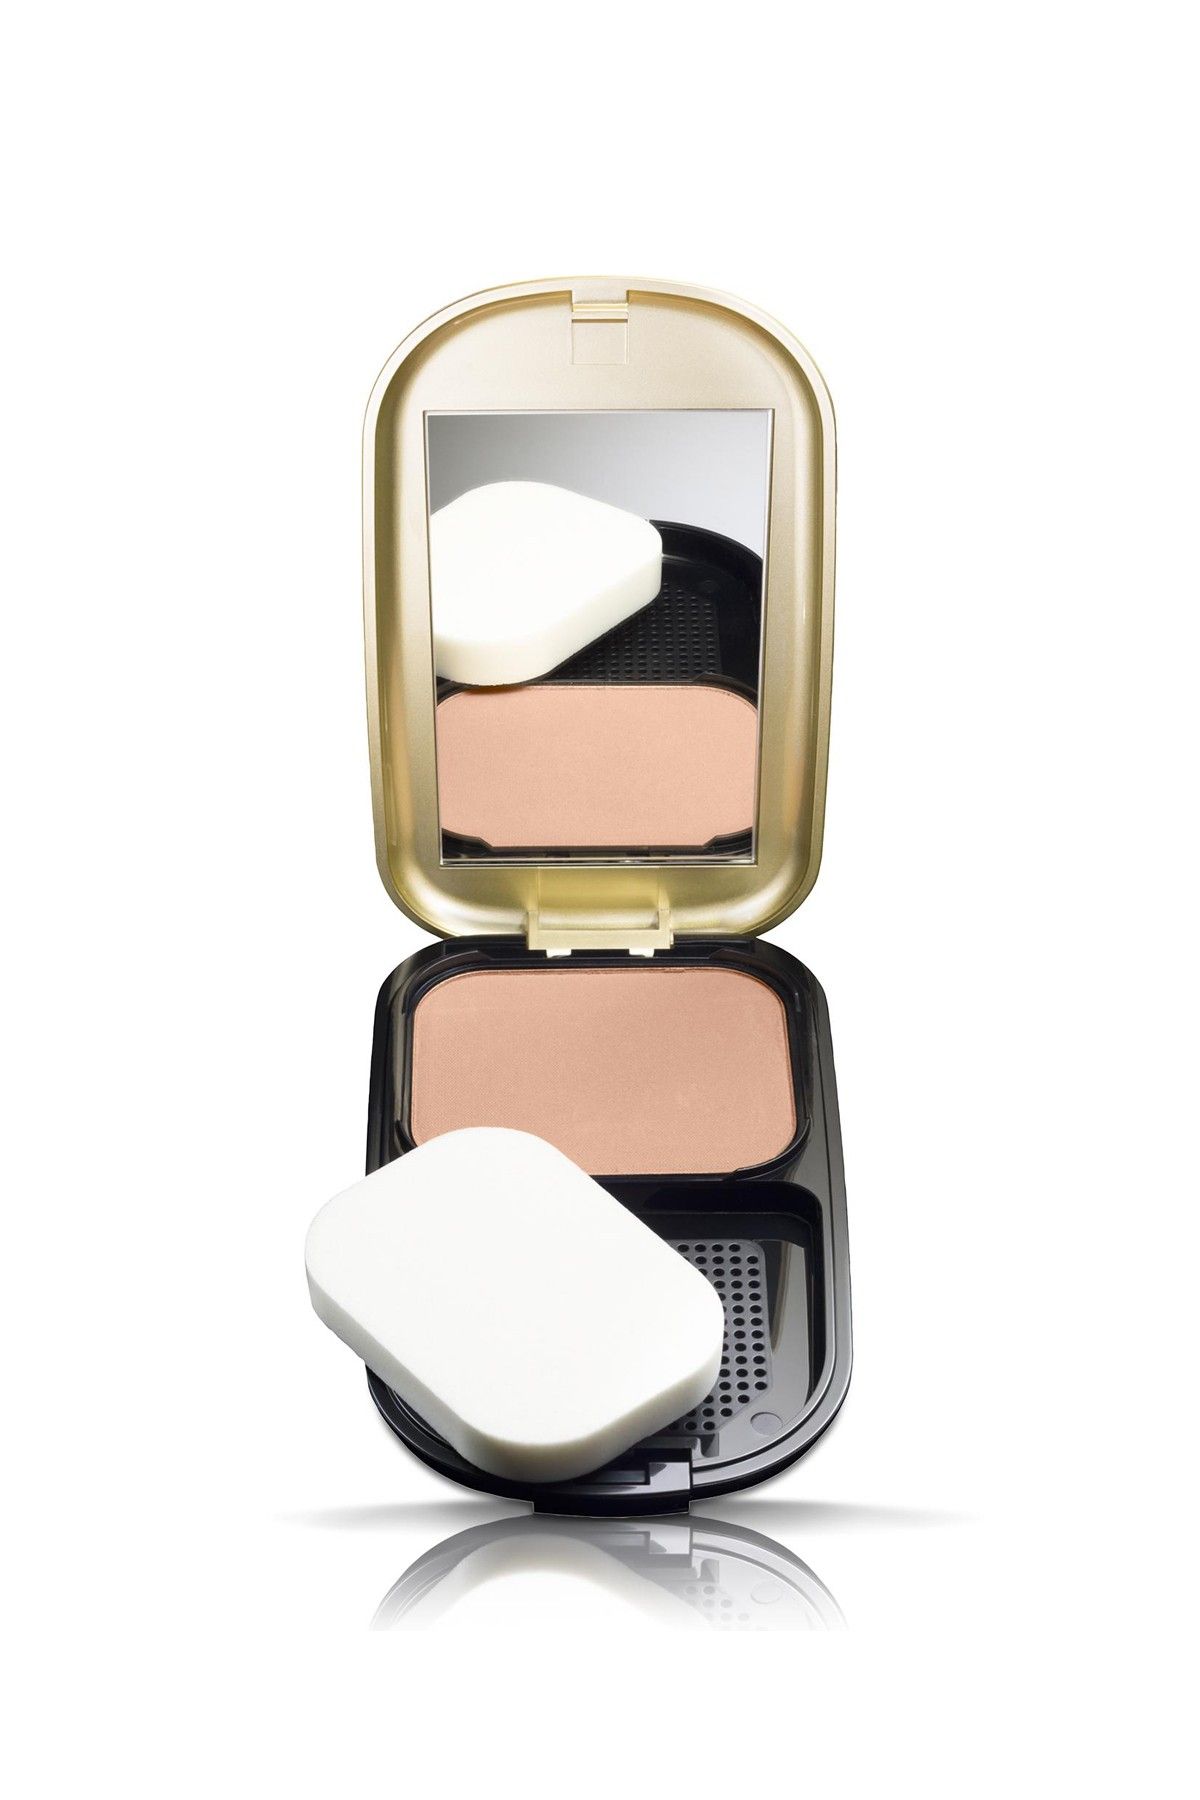 Max Factor Facefinity Compact Foundation, 02 Ivory, 10 g Beige 10g